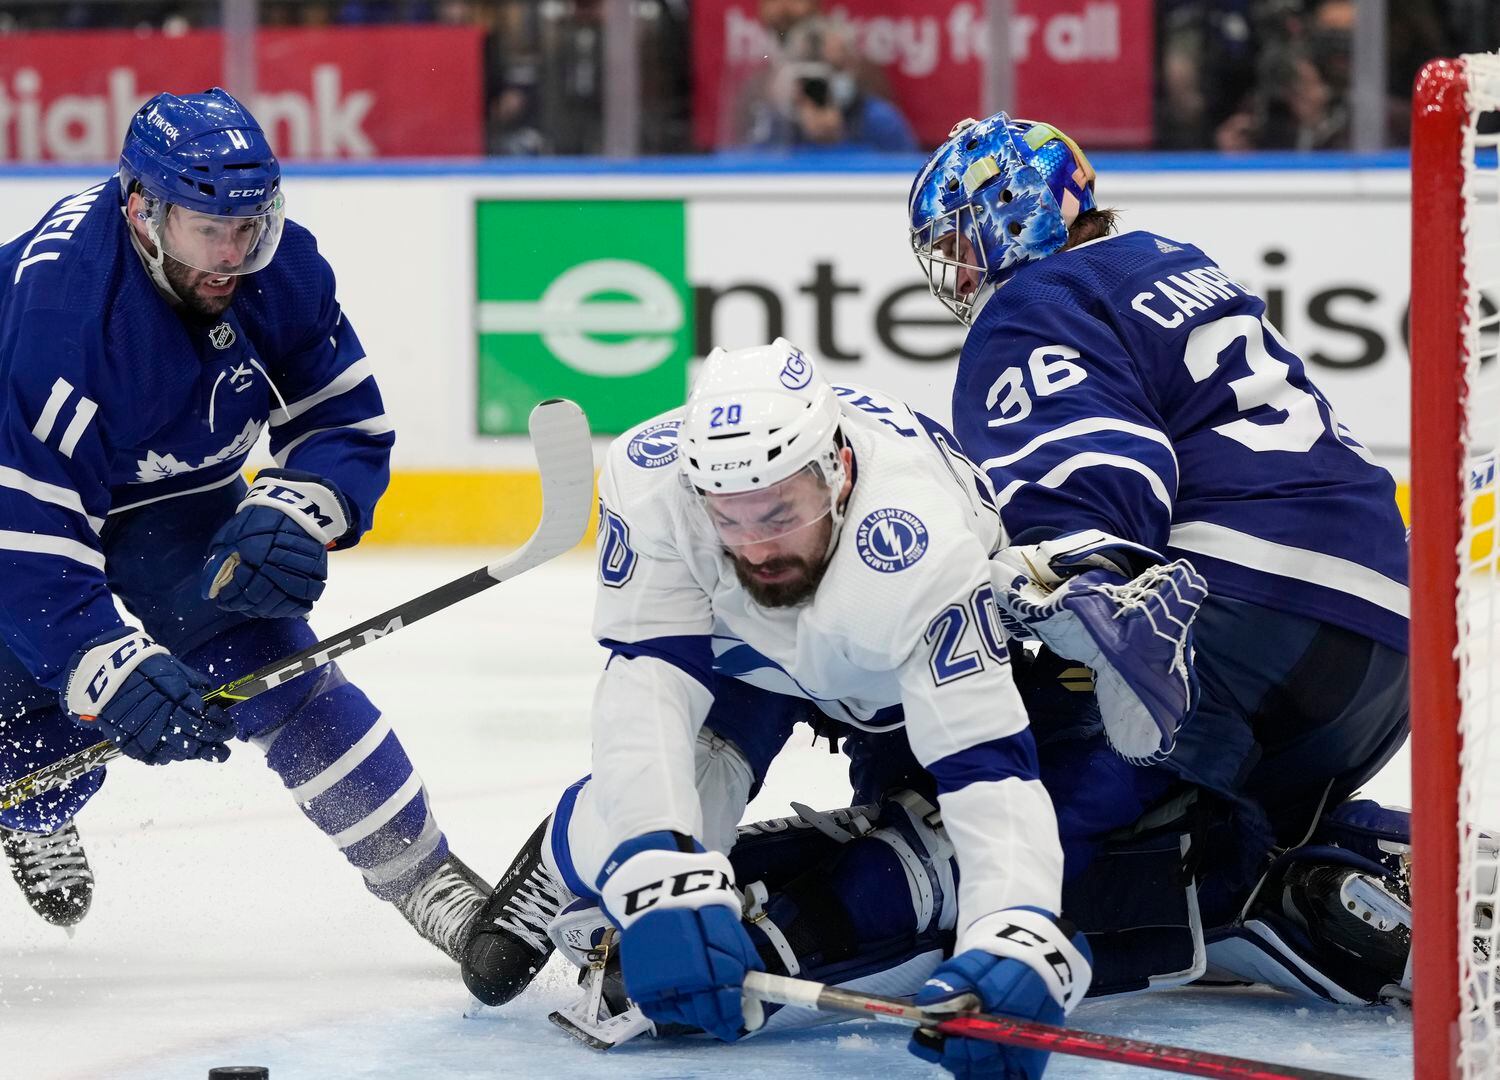 Tampa Bay Lightning vs. Toronto Maple Leafs Game Preview 12/20/2022